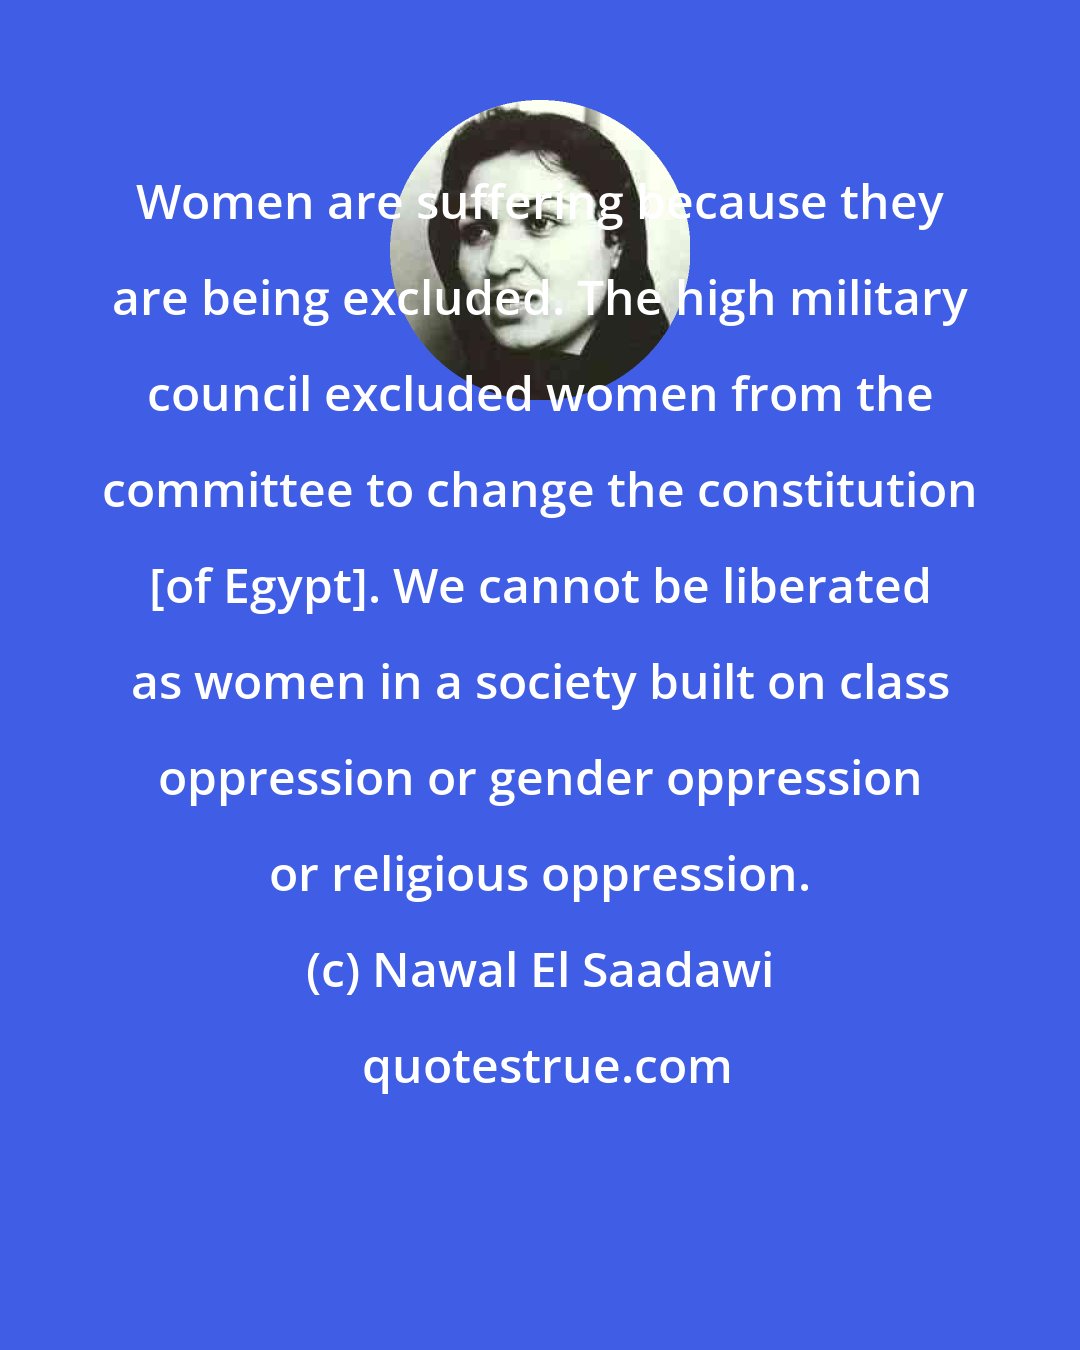 Nawal El Saadawi: Women are suffering because they are being excluded. The high military council excluded women from the committee to change the constitution [of Egypt]. We cannot be liberated as women in a society built on class oppression or gender oppression or religious oppression.